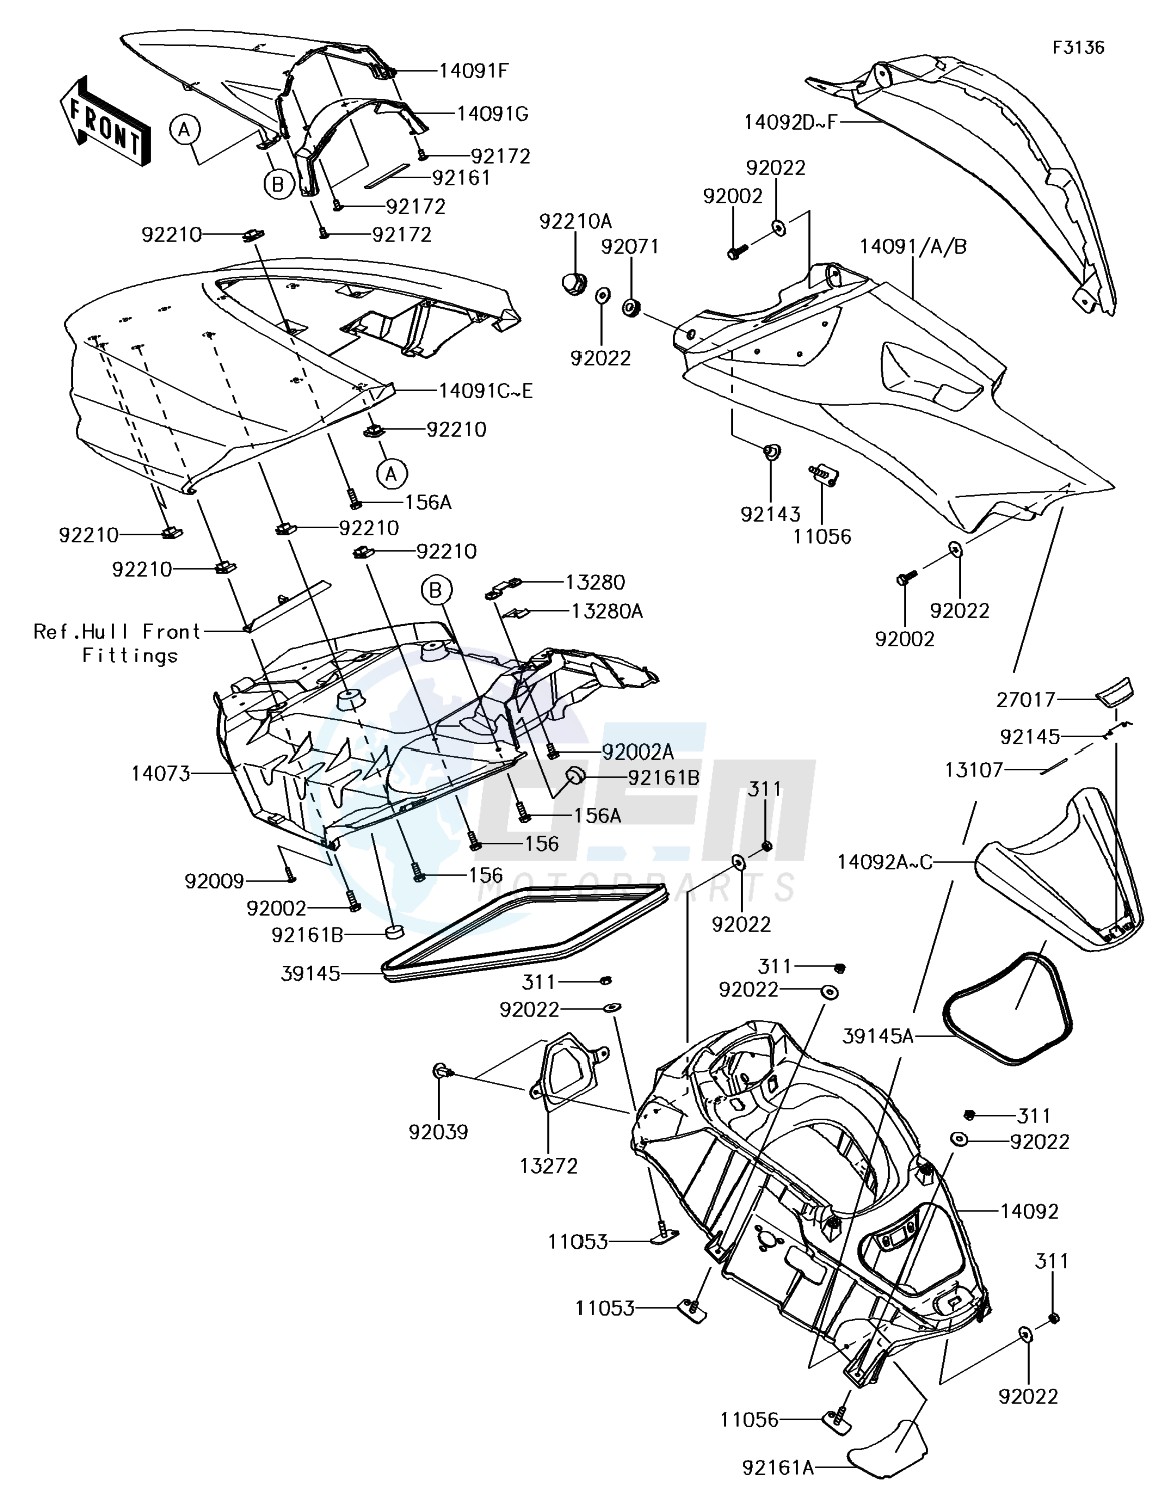 Hull Middle Fittings blueprint